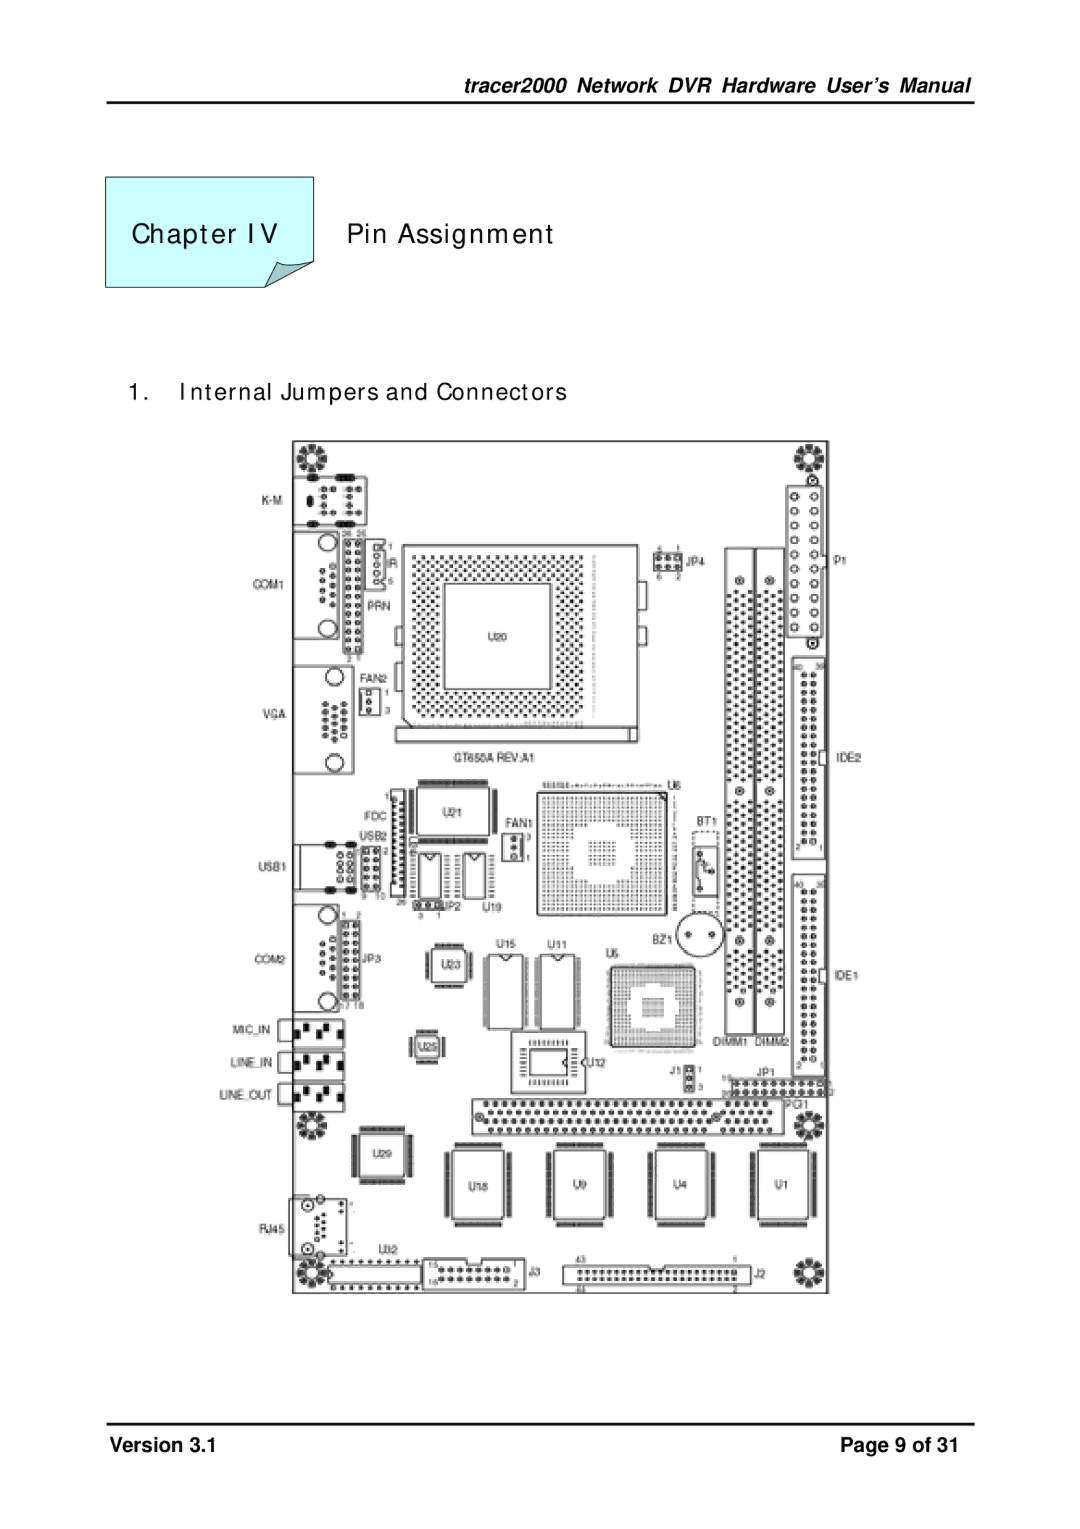 Giantec tracer2000 manual Chapter Pin Assignment, Internal Jumpers and Connectors 